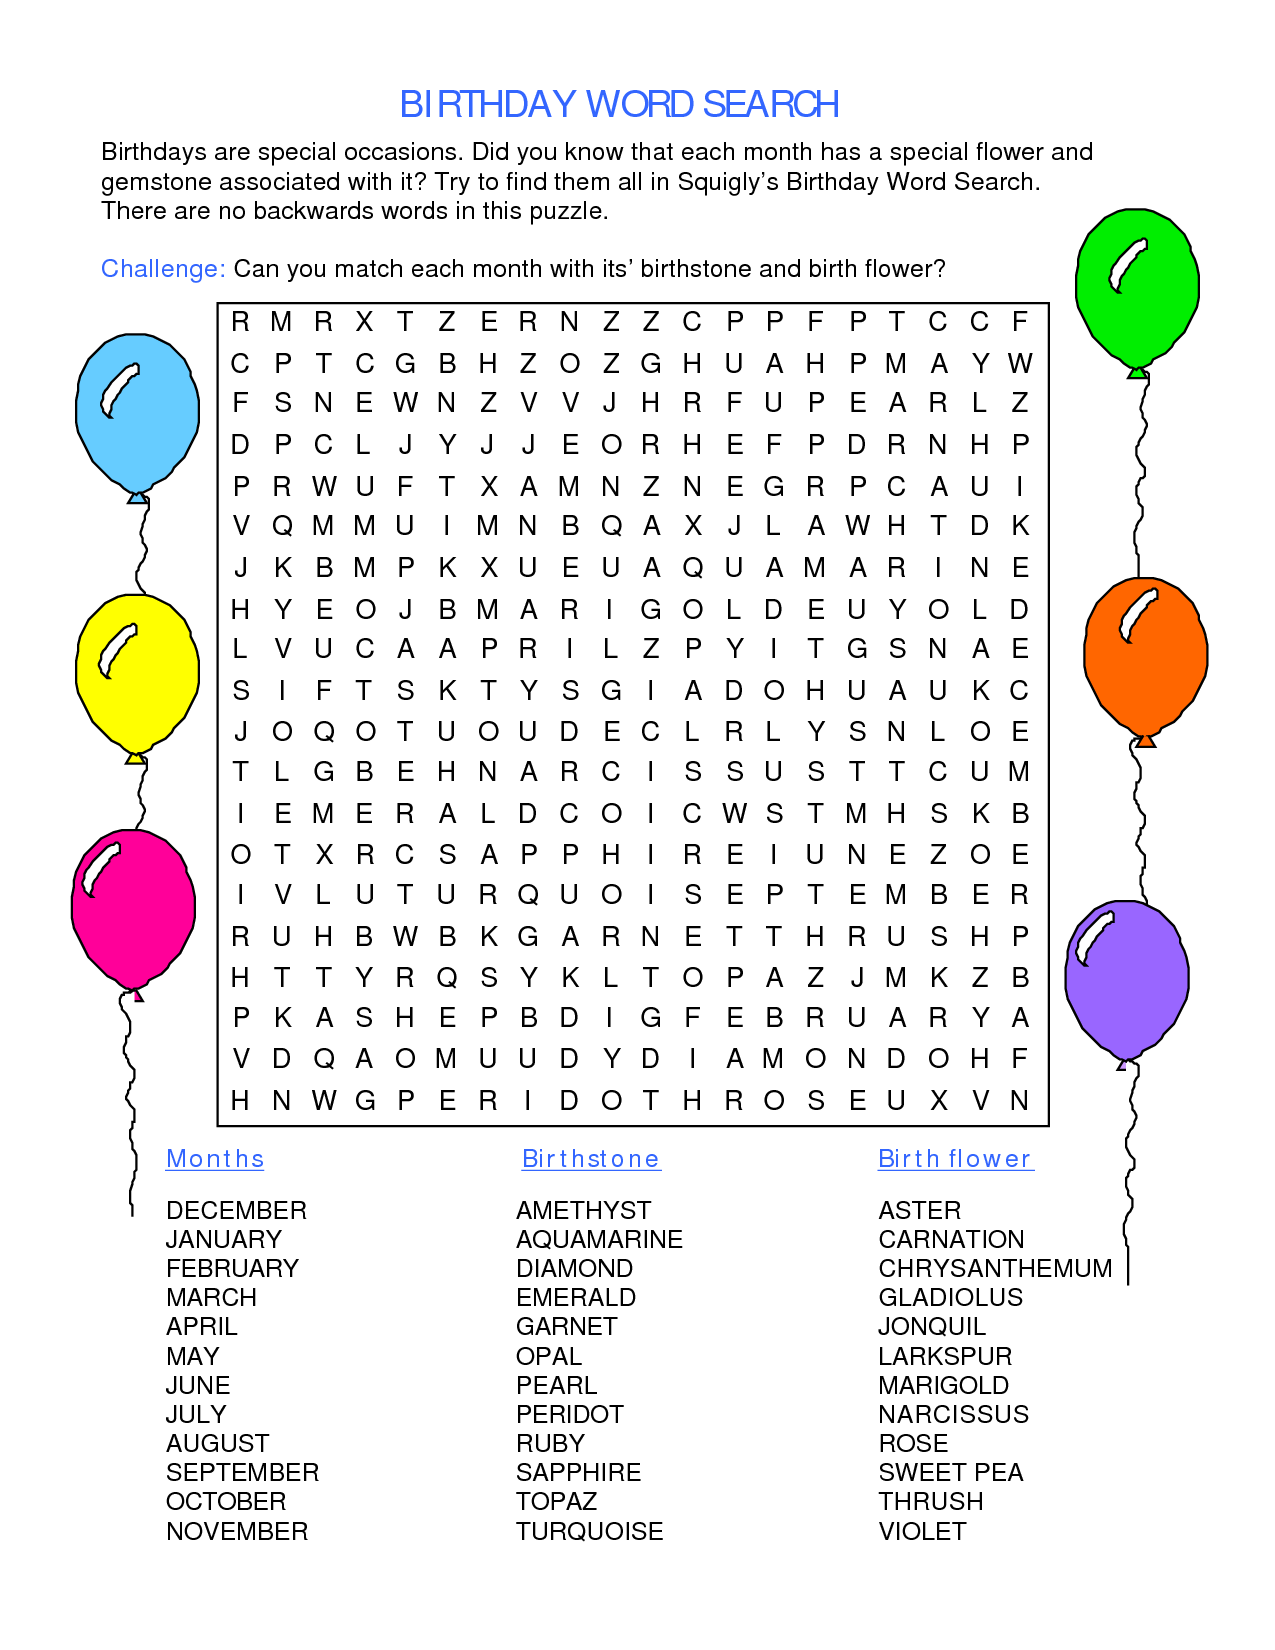 4-best-images-of-happy-birthday-printable-word-puzzles-birthday-word